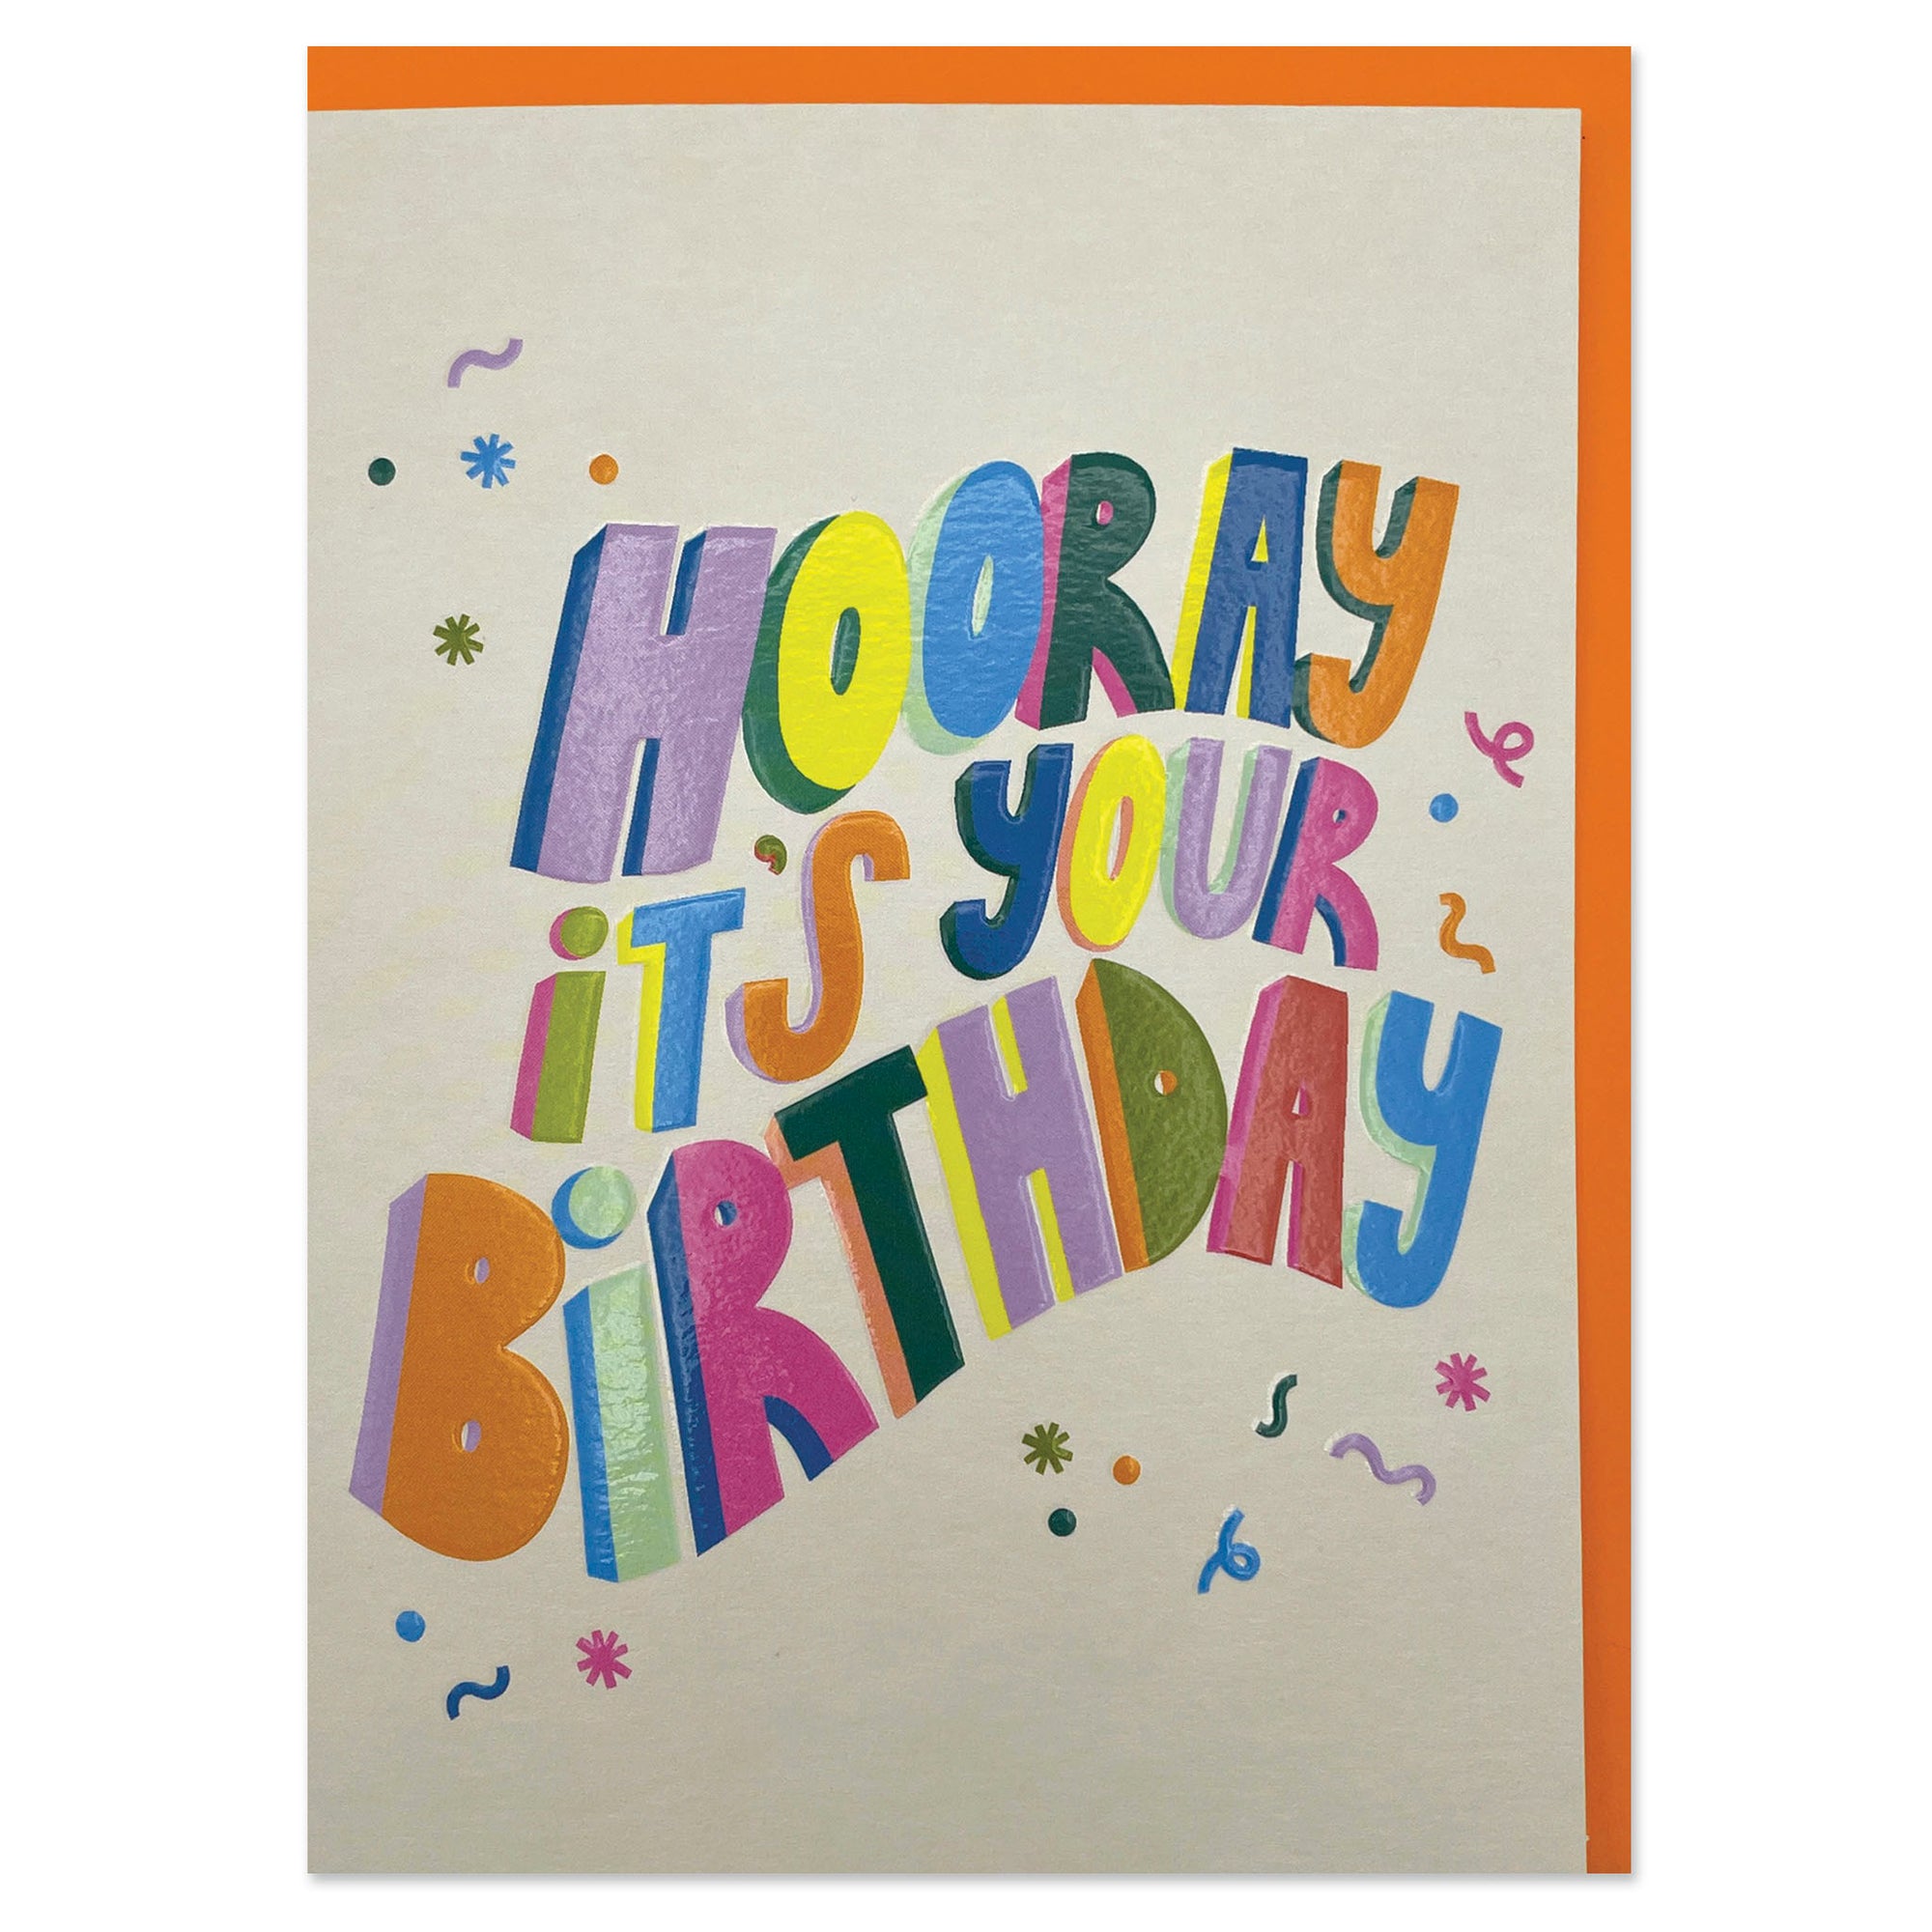 A cream coloured greetings card for a birthday, with a bright orange envelope. It has big wavy colourful words across the front saying in 3D capital letters 'hooray it's your birthday'. There is some confetti flying around the words too.